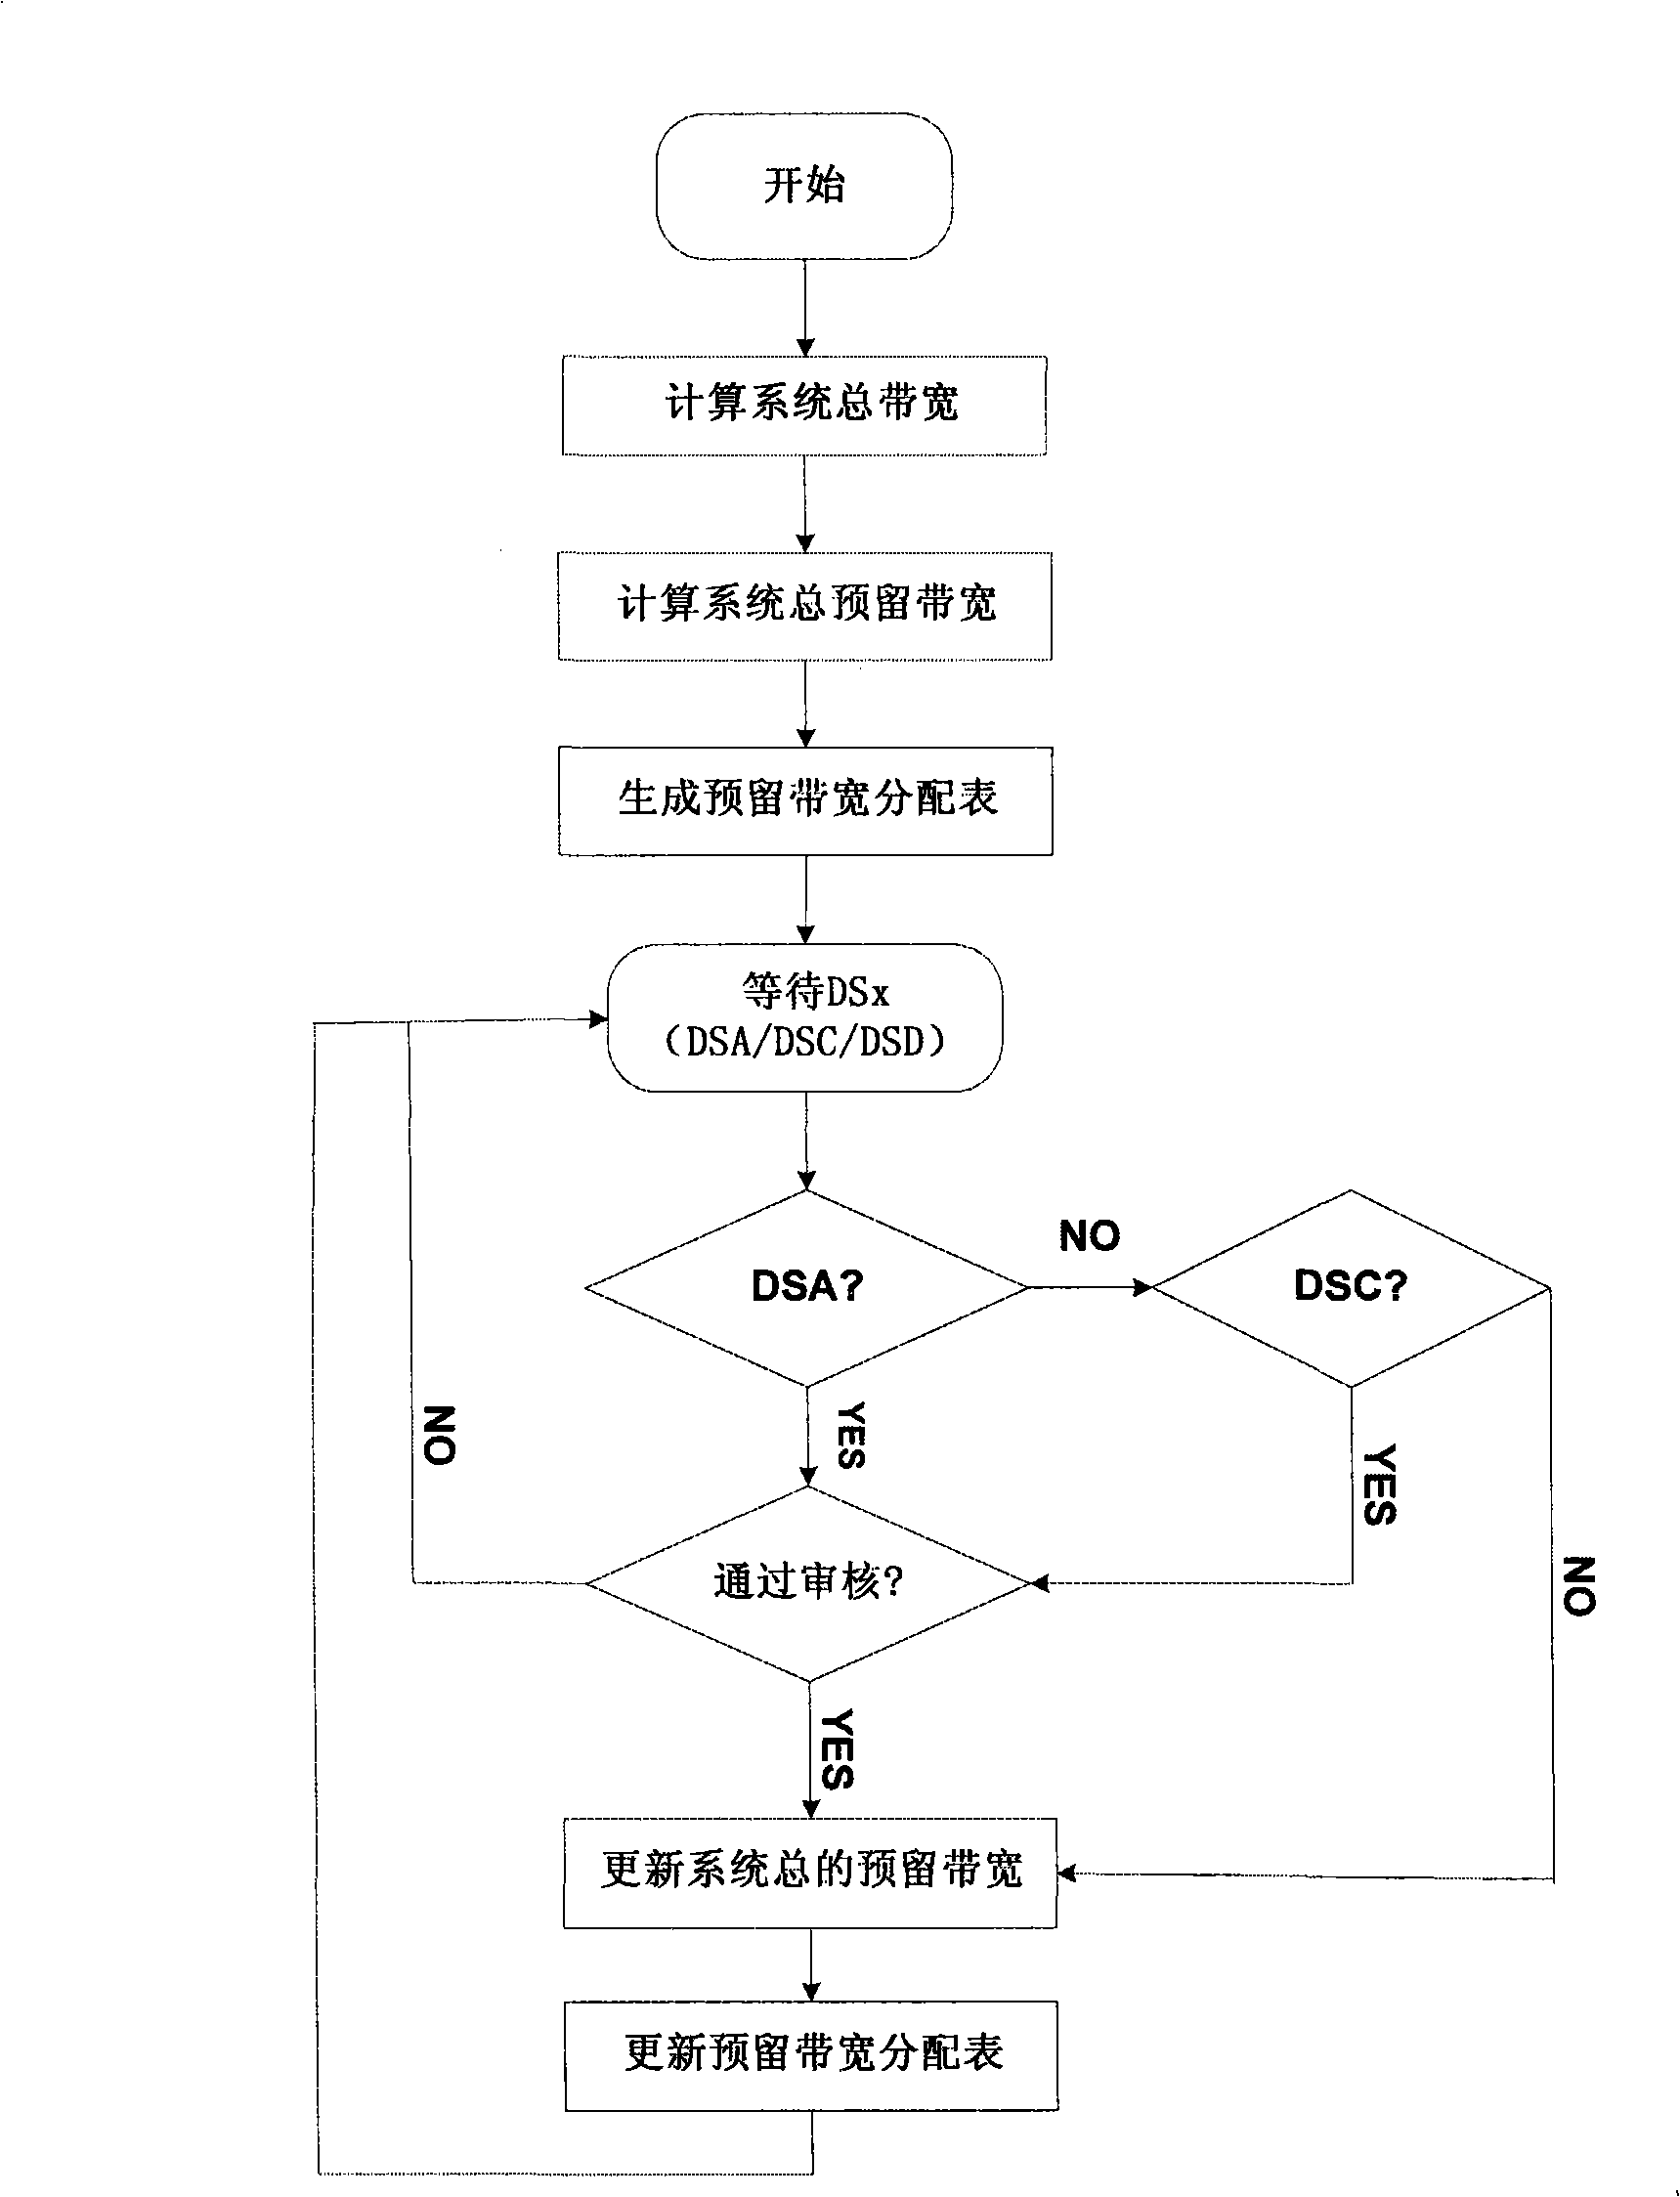 Method of service flow access control and bandwidth allocation based on OFDM system